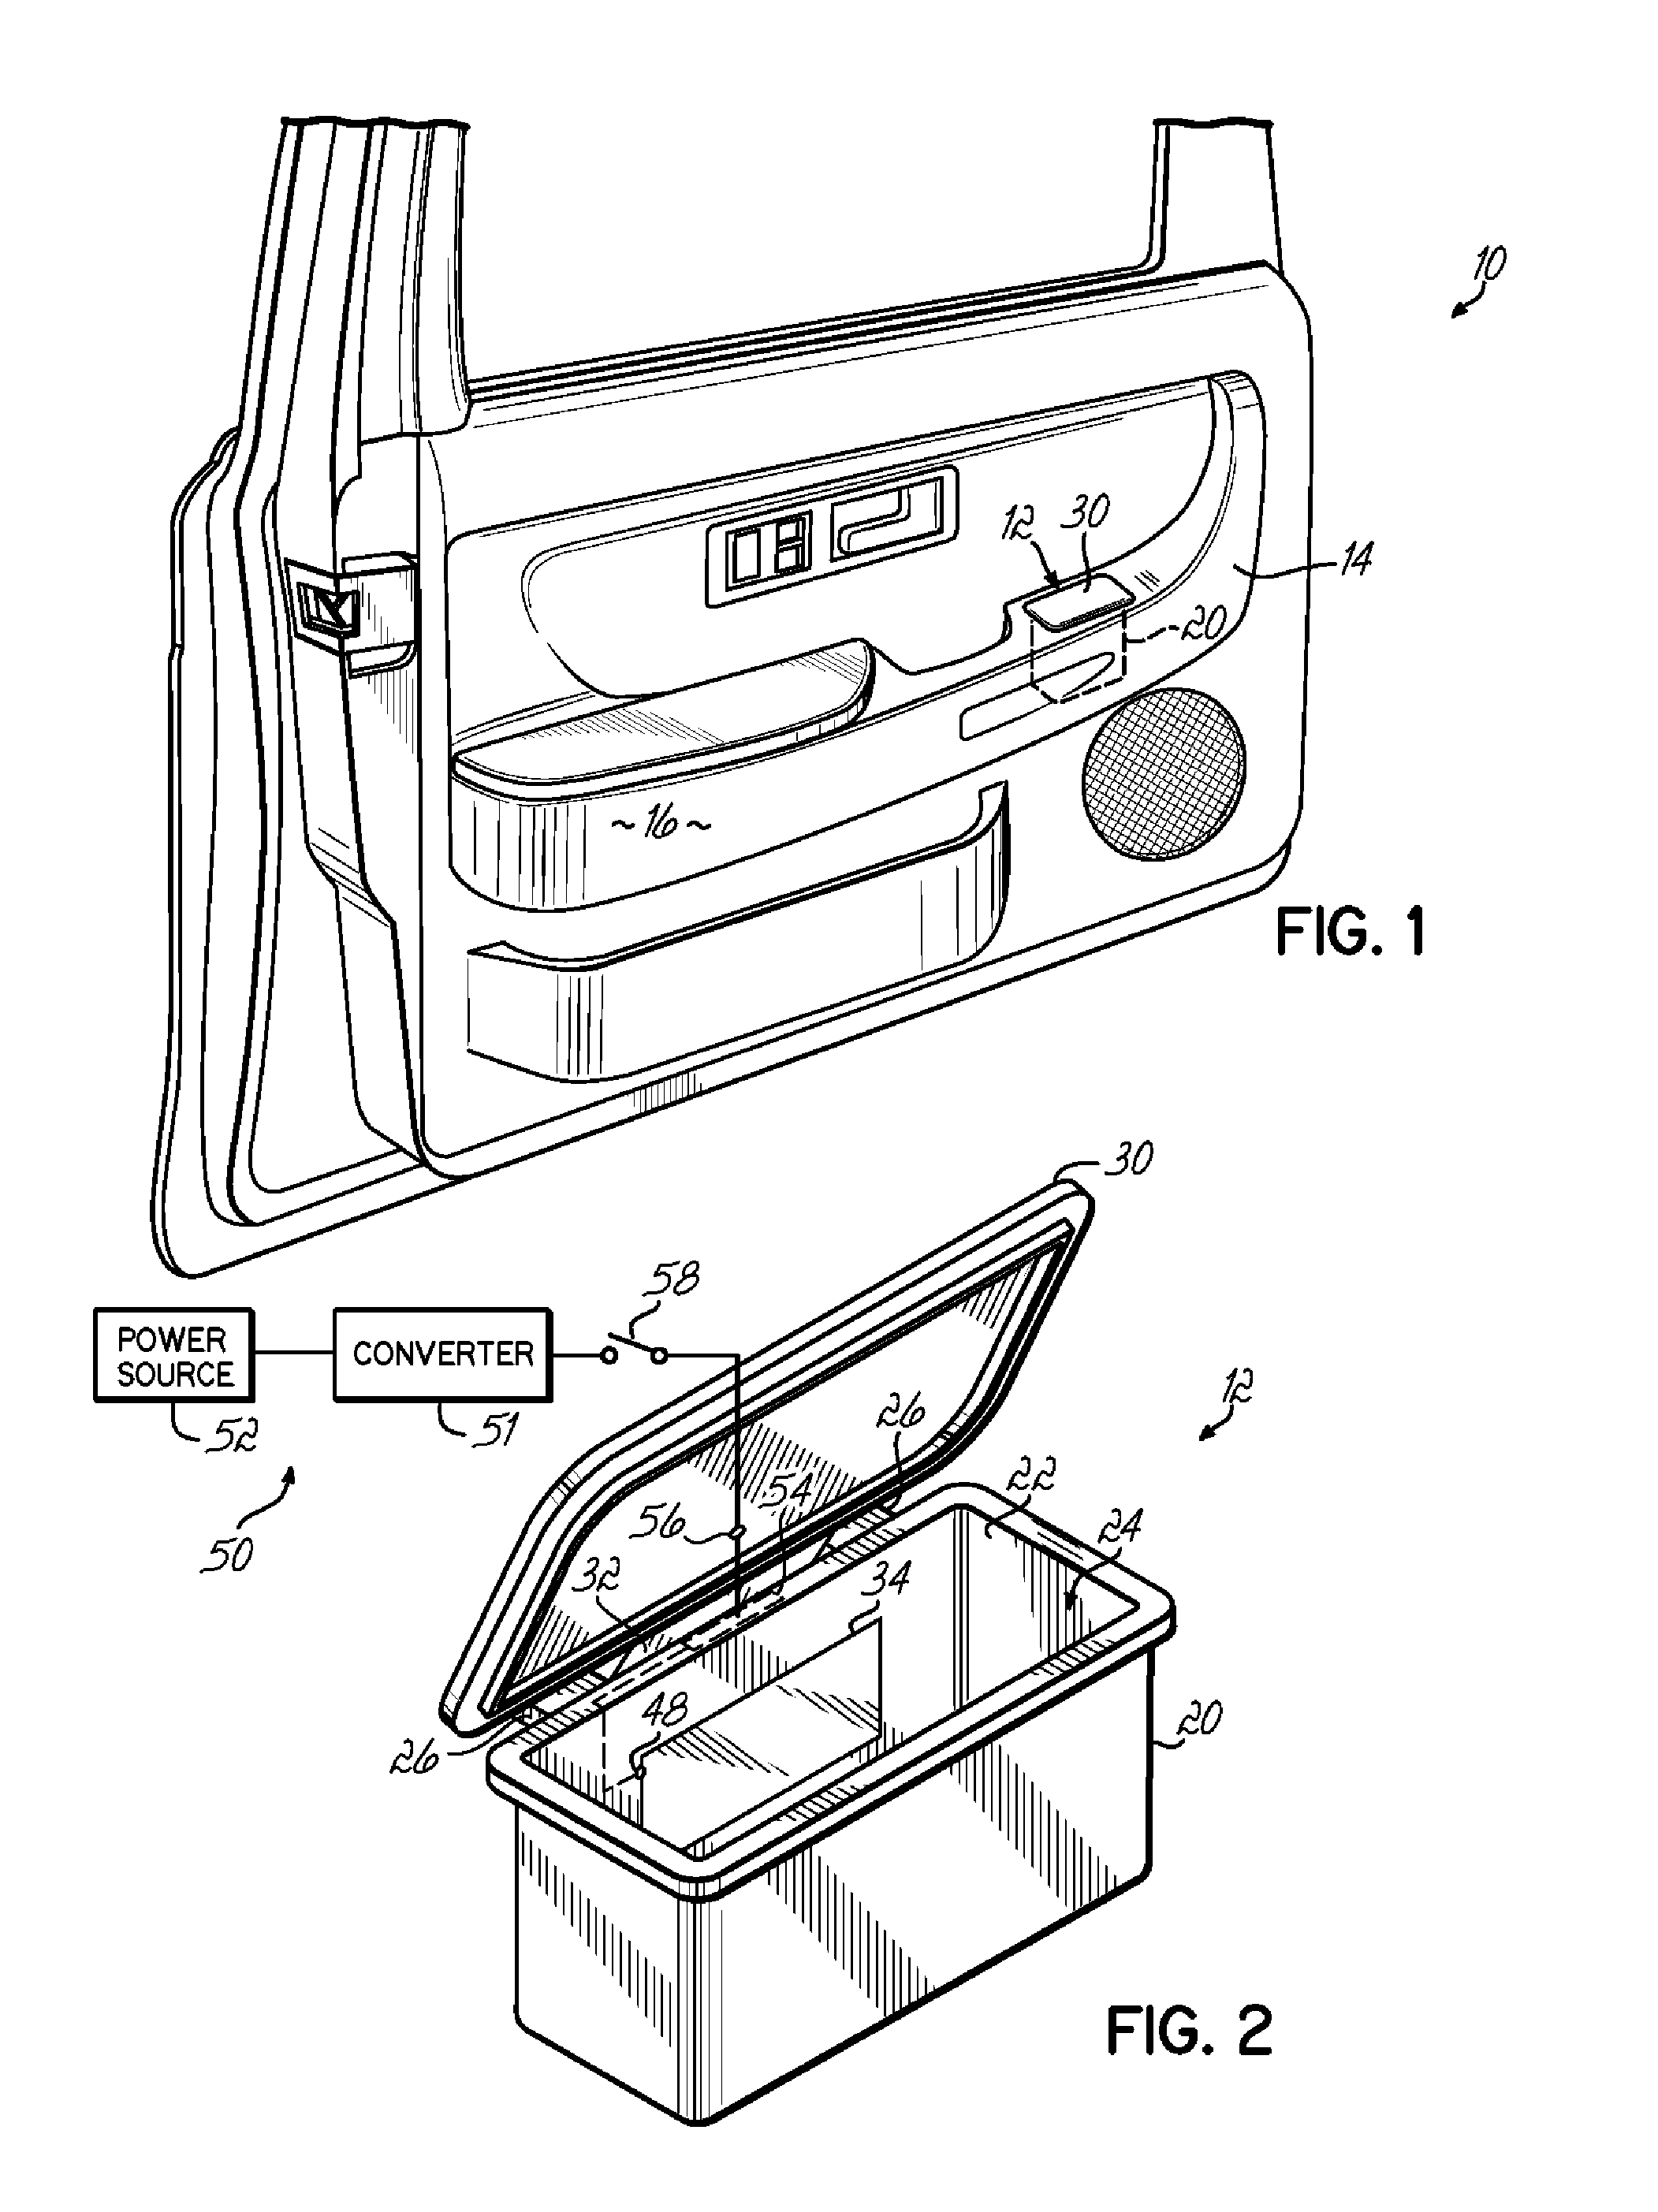 Automotive ashtray having an electroluminescent lamp and method of making the same